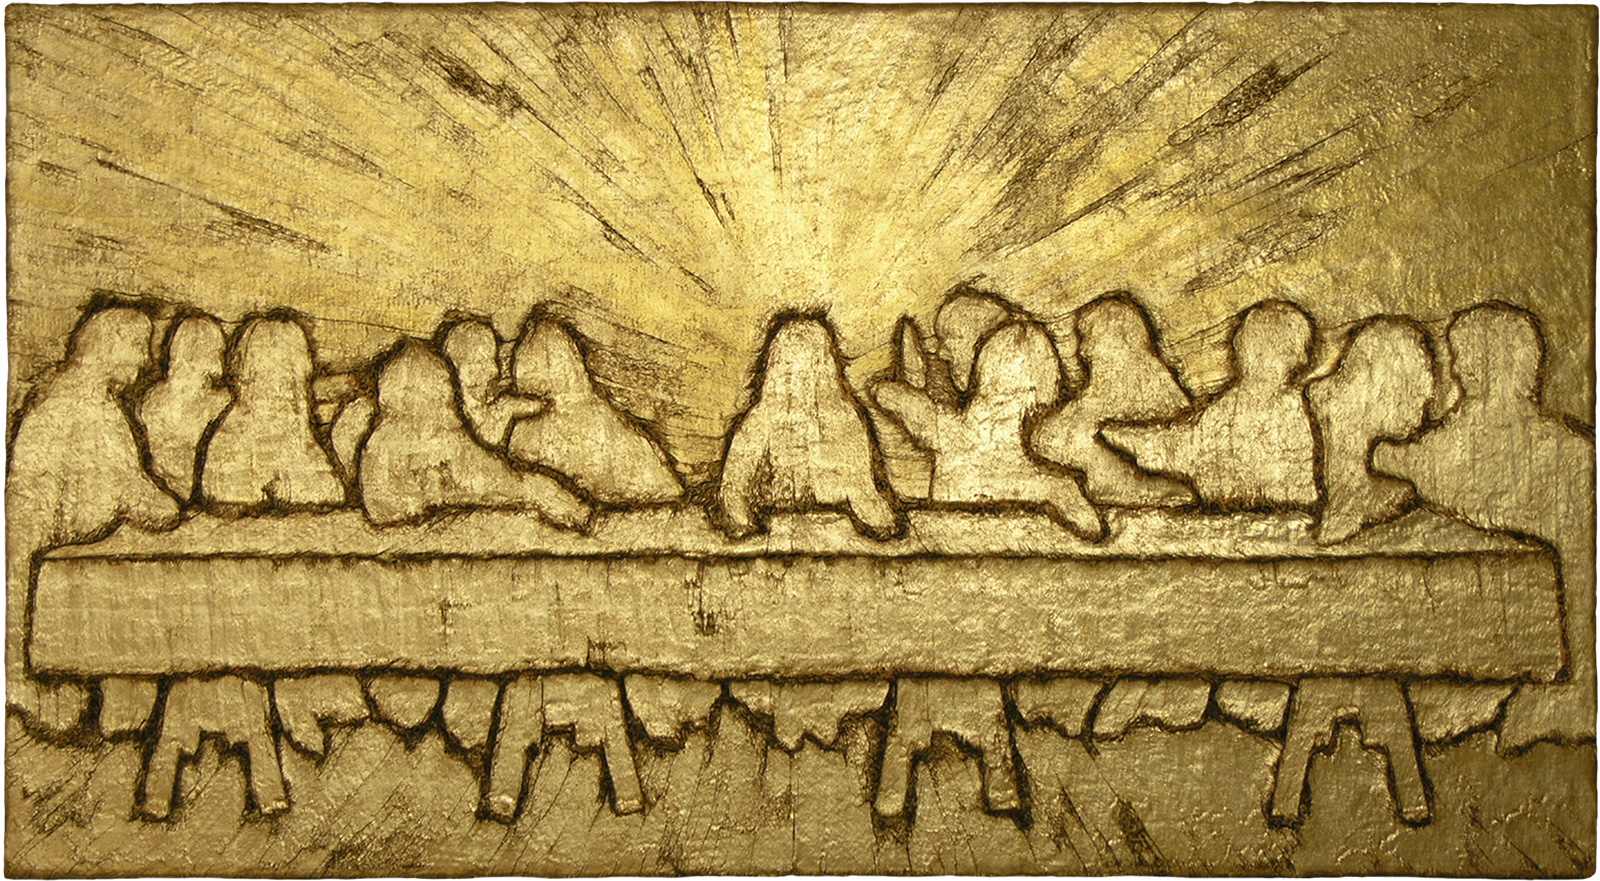 Golden Last Supper, a painting by Guido Vrolix